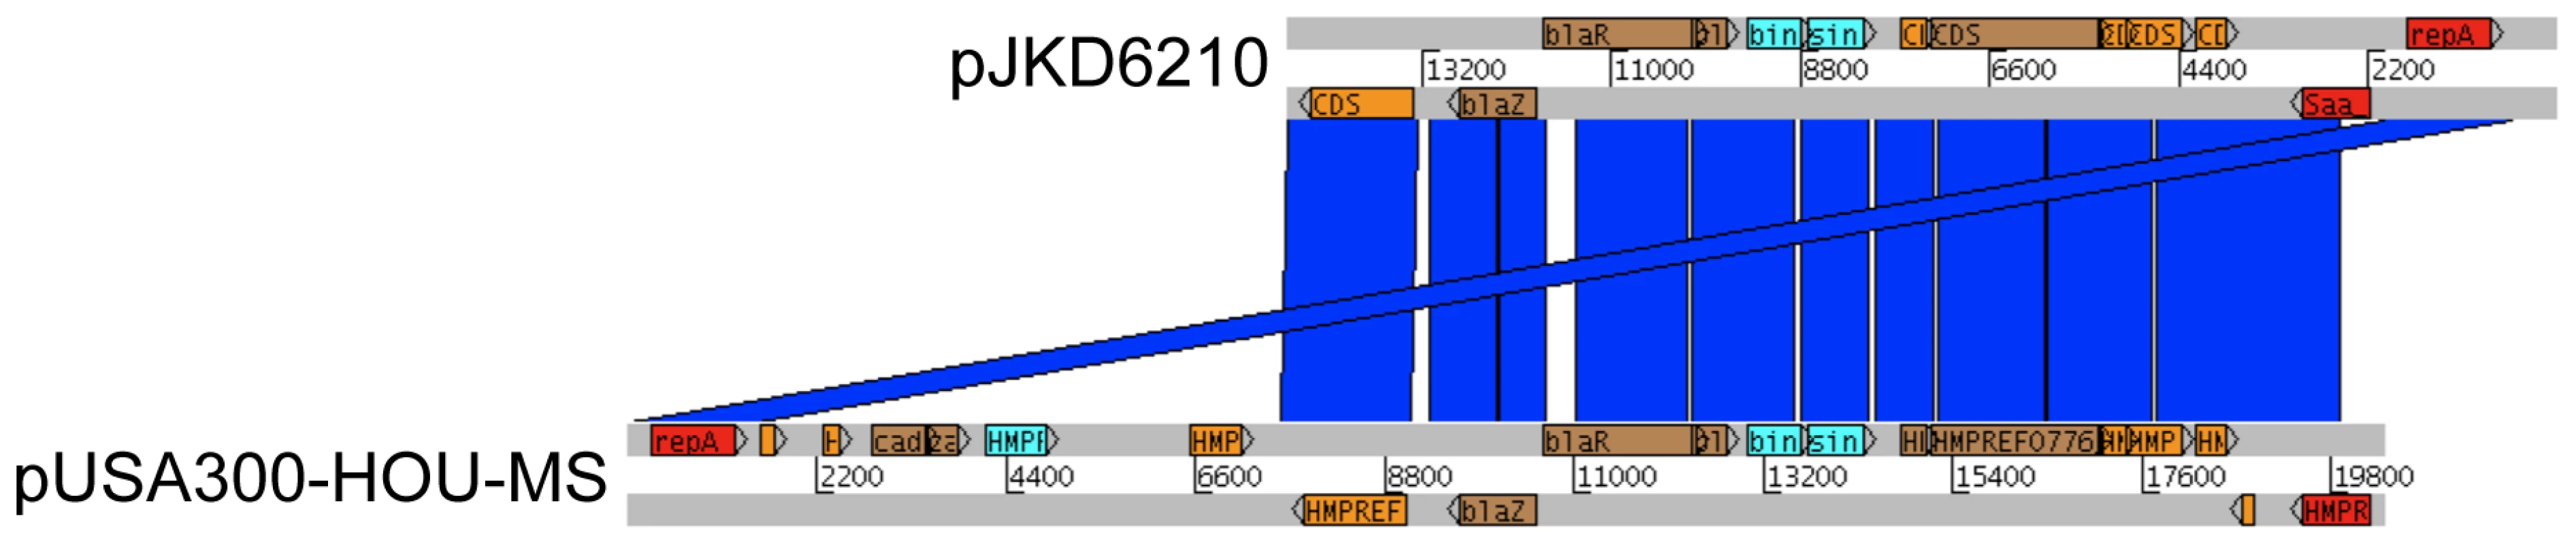 Sequence comparison of pJKD6210 and pUSA300-HOU-MS.